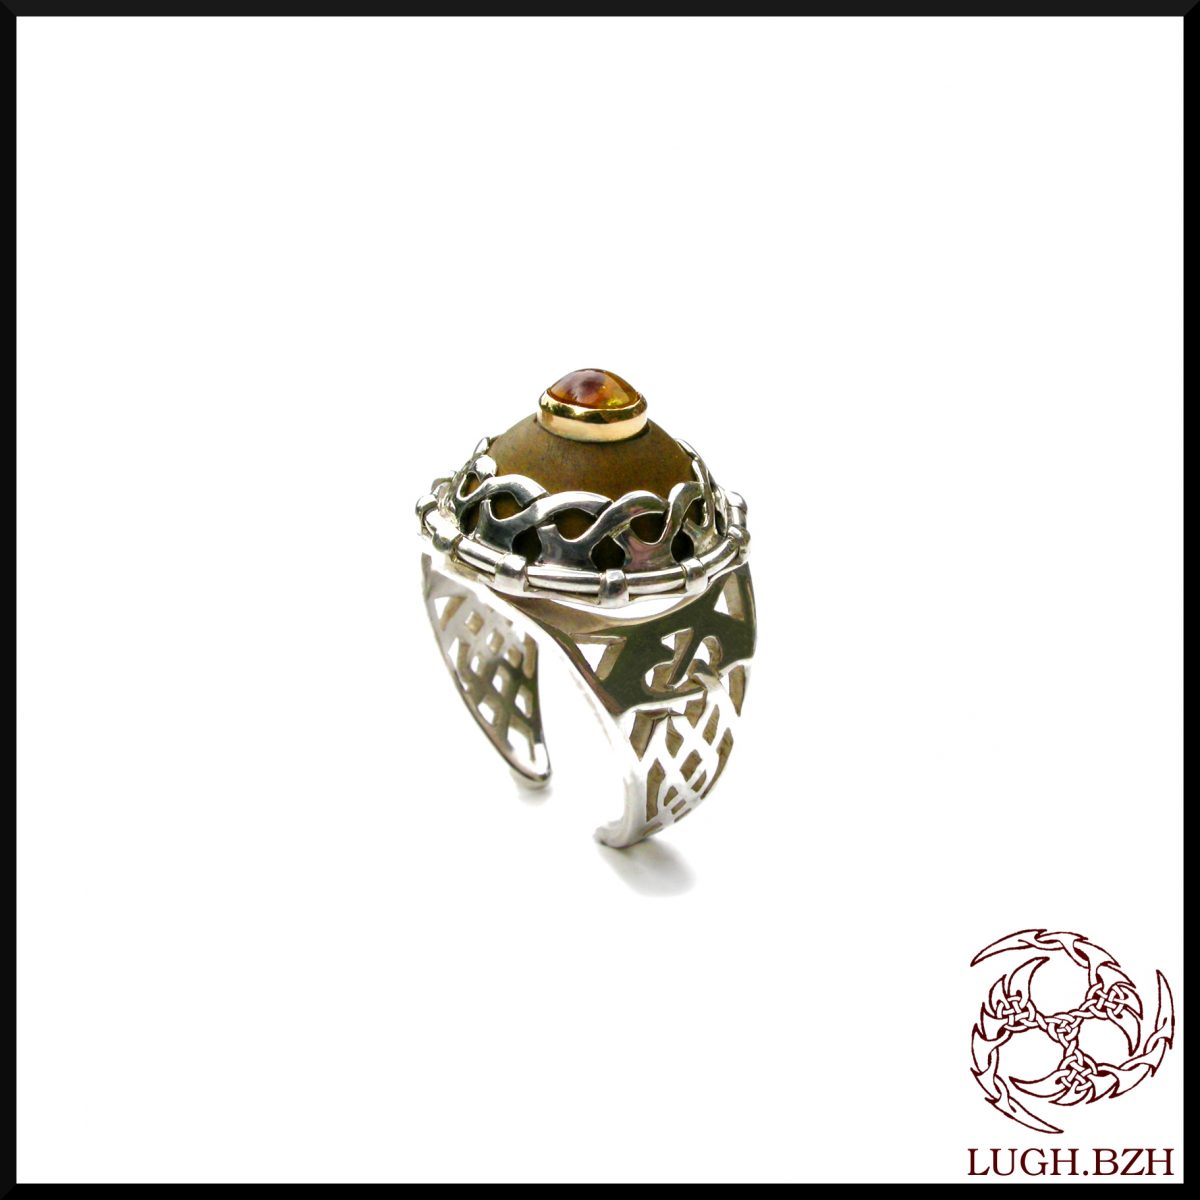 Tuchenn Mikael - Bague en or, argent, ambre et buis - Gold, silver, amber and boxwood ring